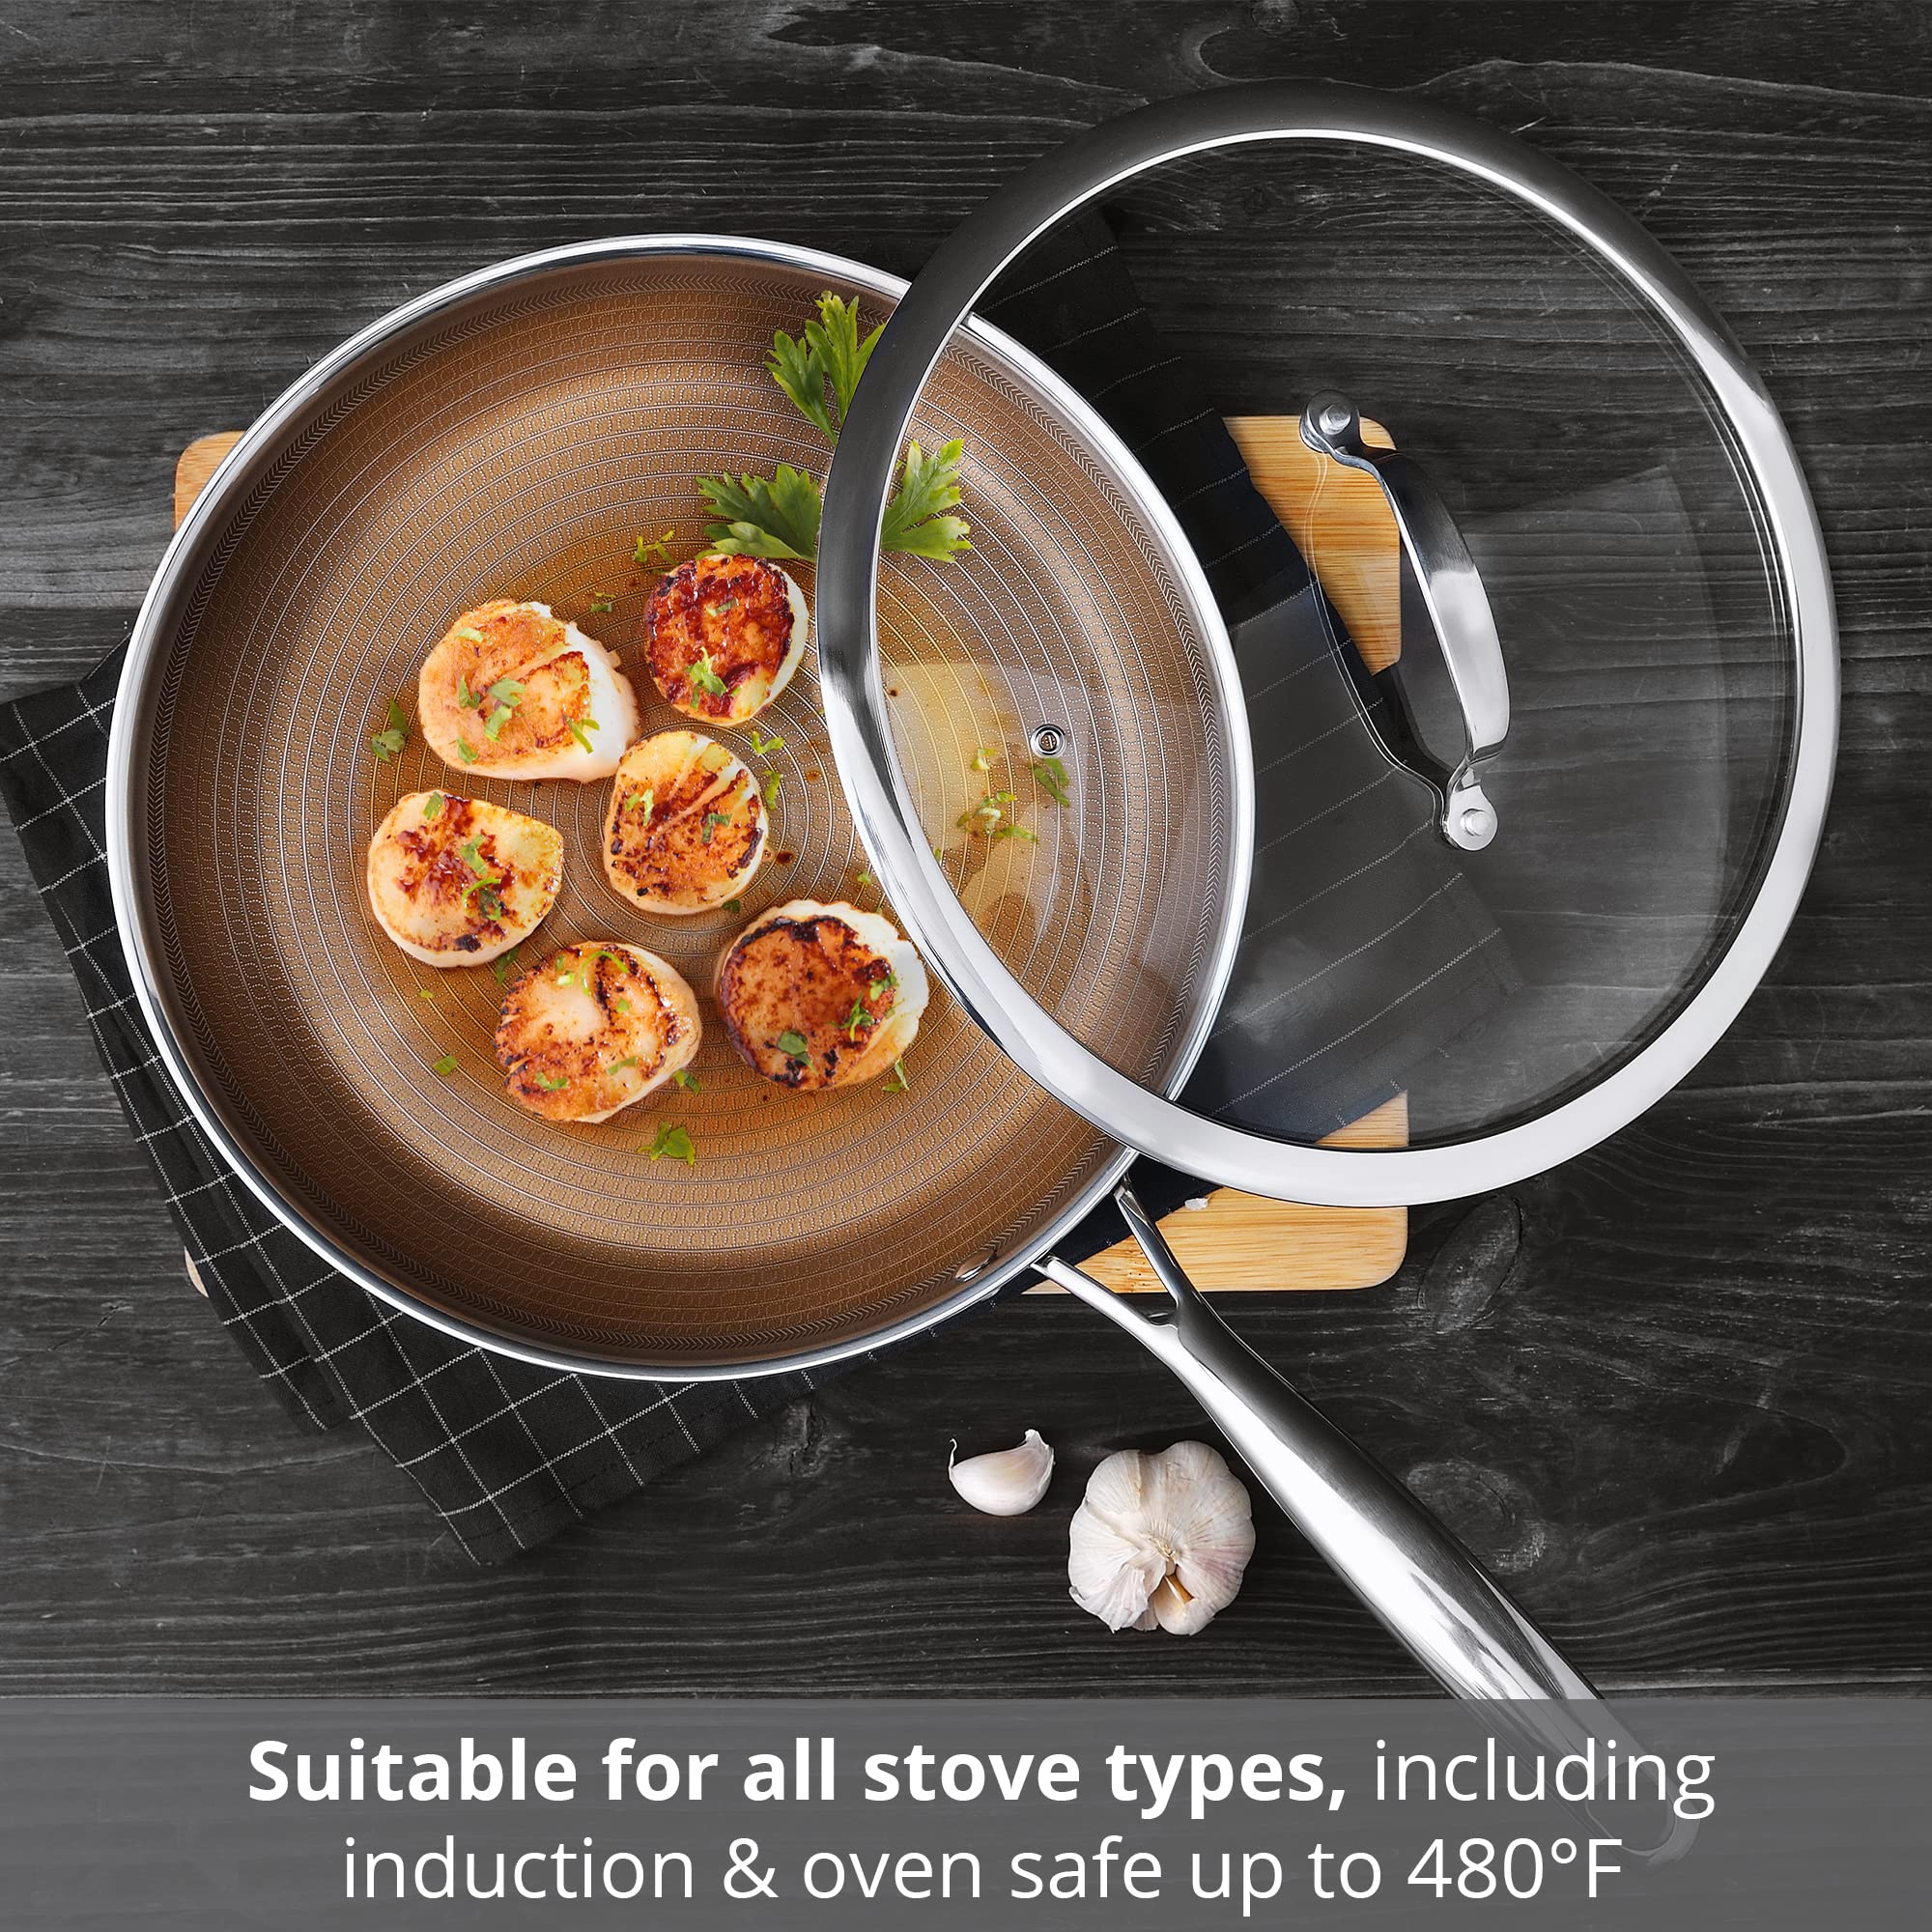 MasterPRO - Giro Collection - 12” Fry Pan with Lid - Tri Ply Stainless Steel Aluminum Core Cookware with Multi-Layer Nonstick Coating - 12” Fry Pan - Metal Utensil Safe